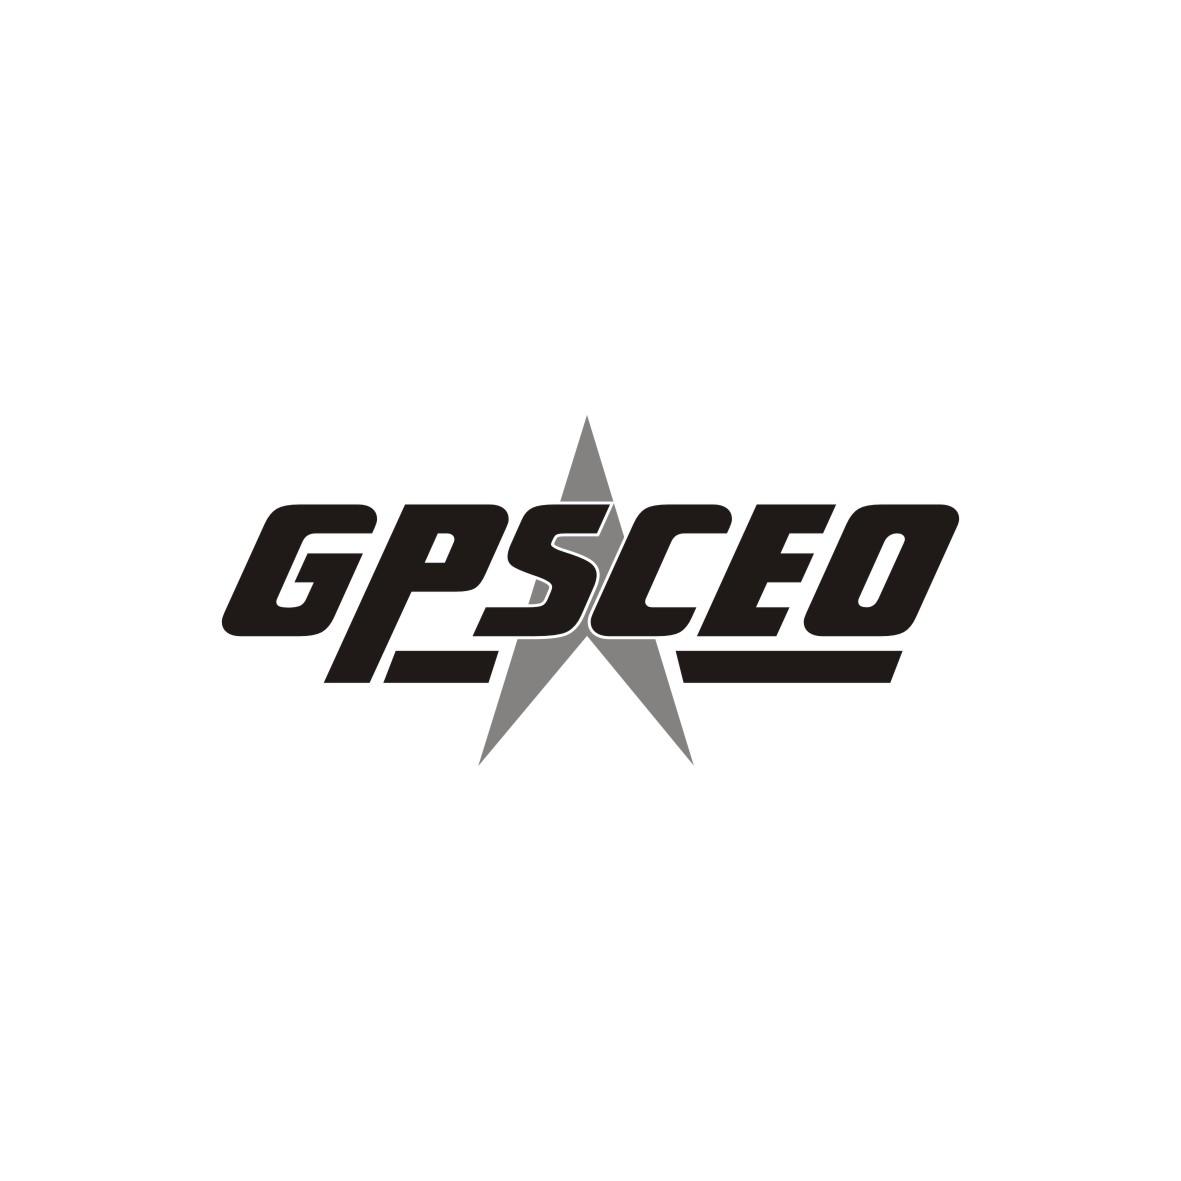 GPSCEO